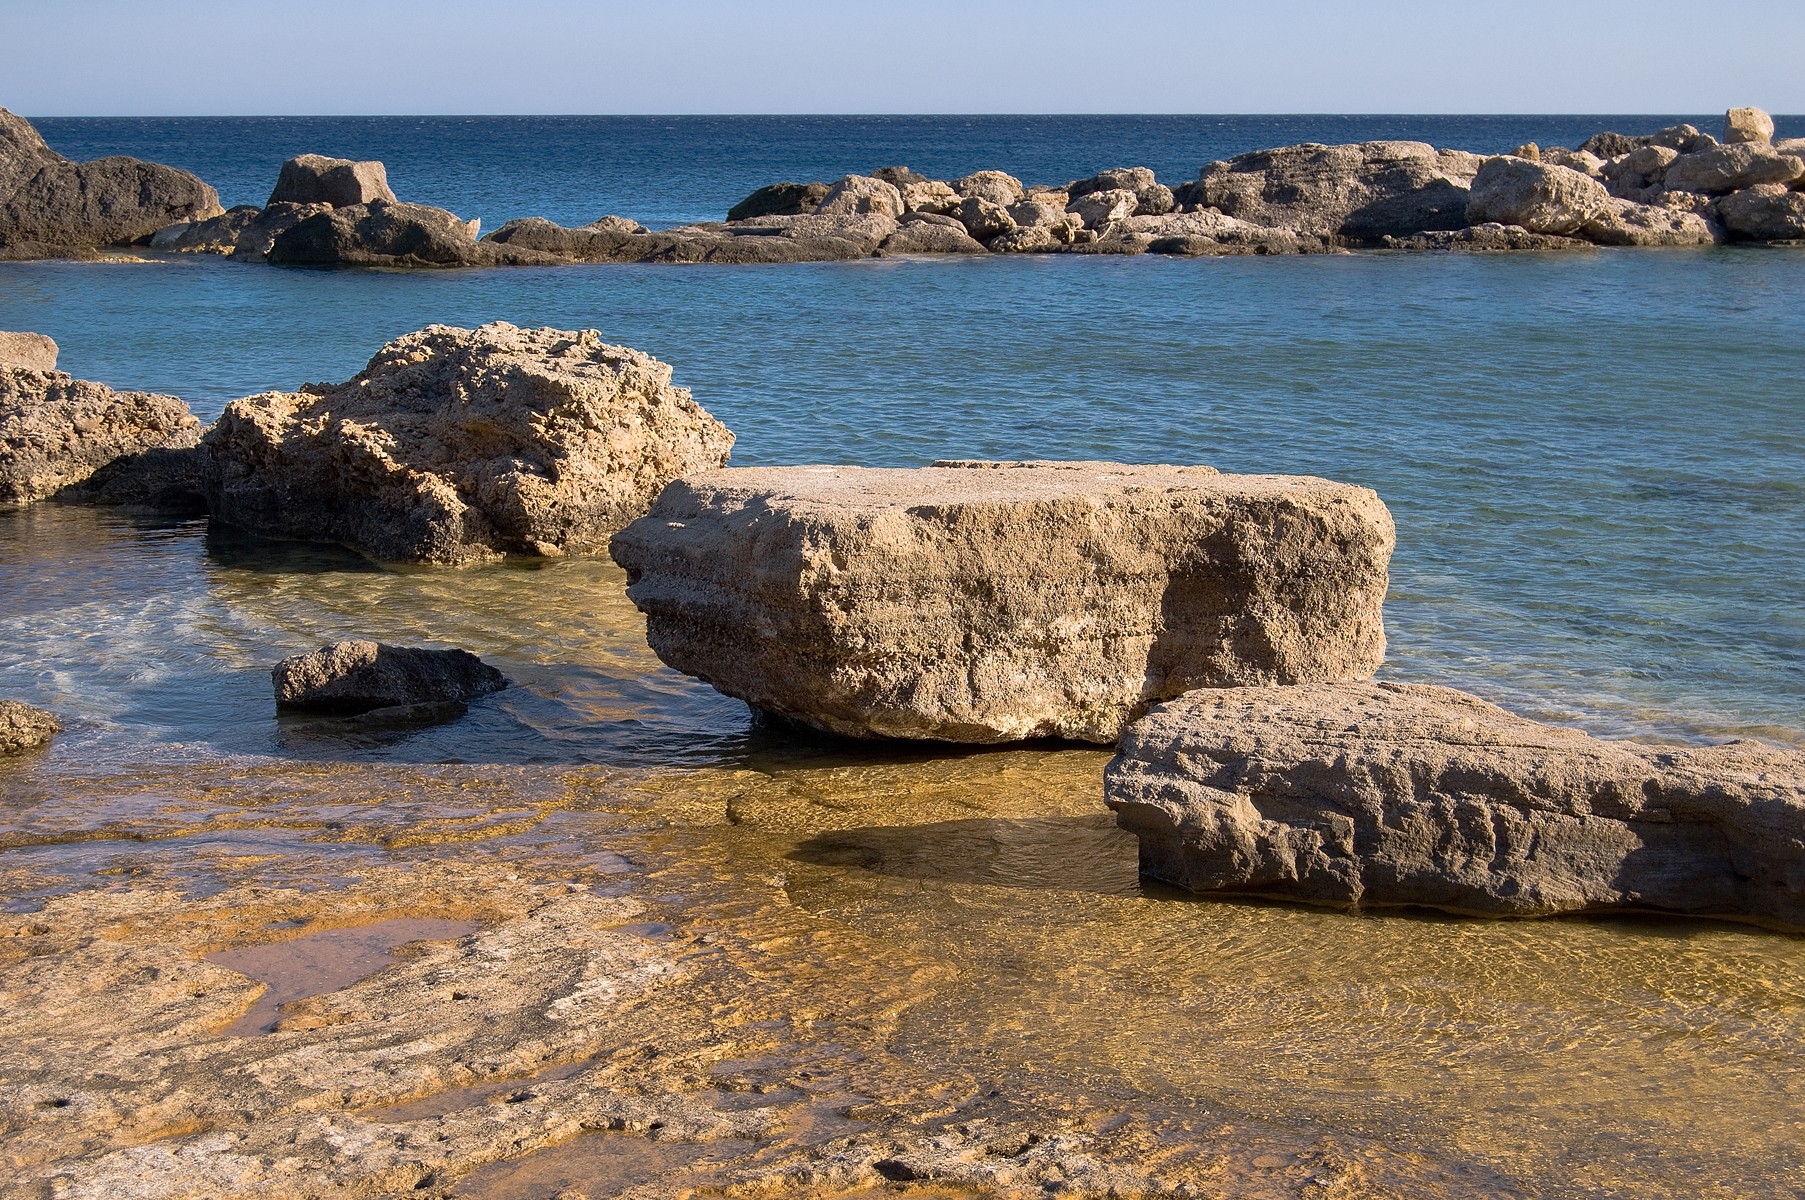 shore rocks picture, by roon for: rocks rock photography contest ...